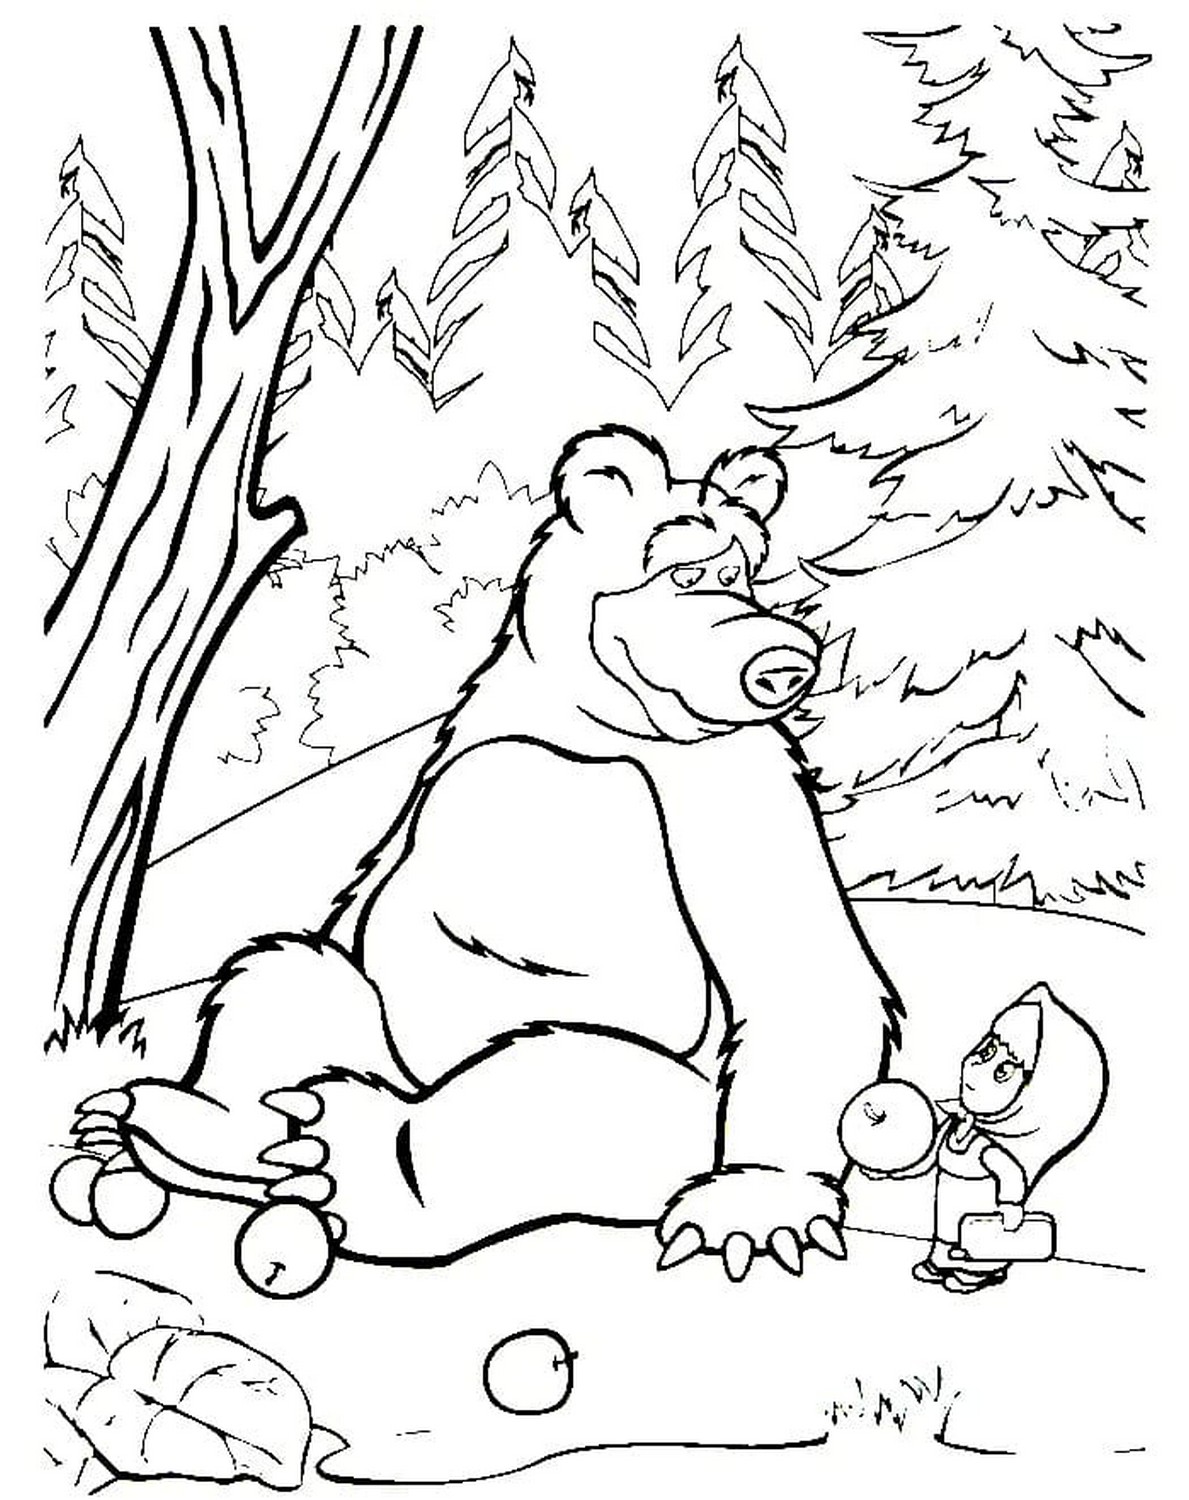 Masha and the Bear 68 drawing from Masha and the Bear to print and color